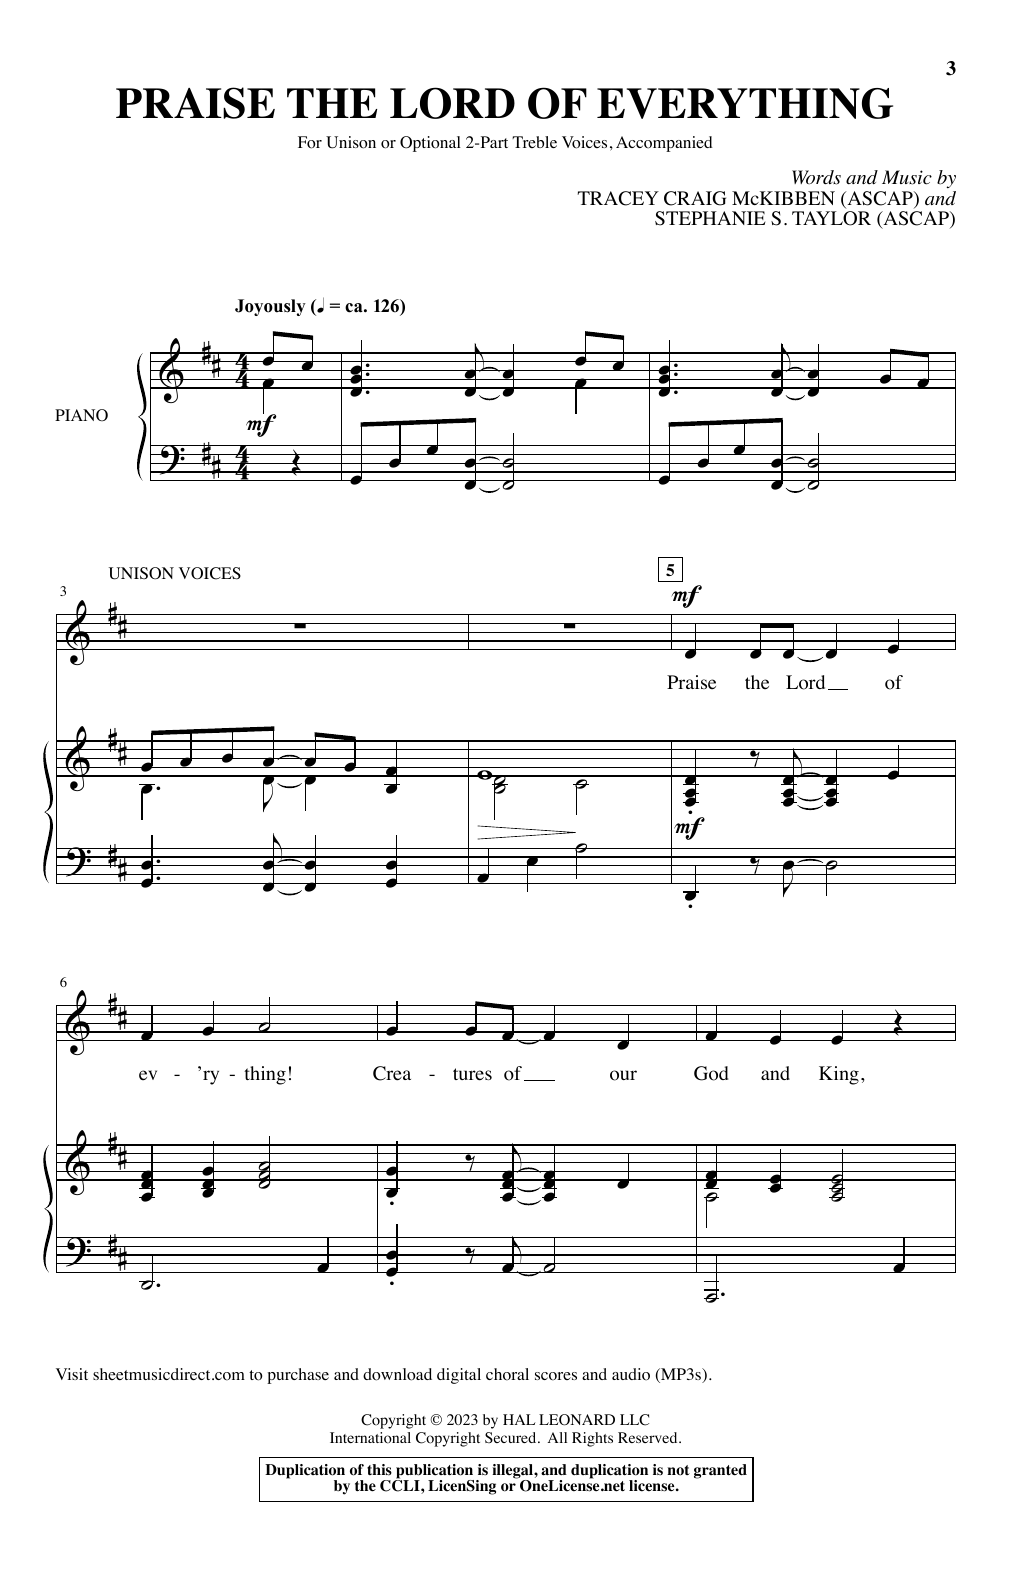 Download Tracey Craig McKibben and Stephanie Praise The Lord Of Everything Sheet Music